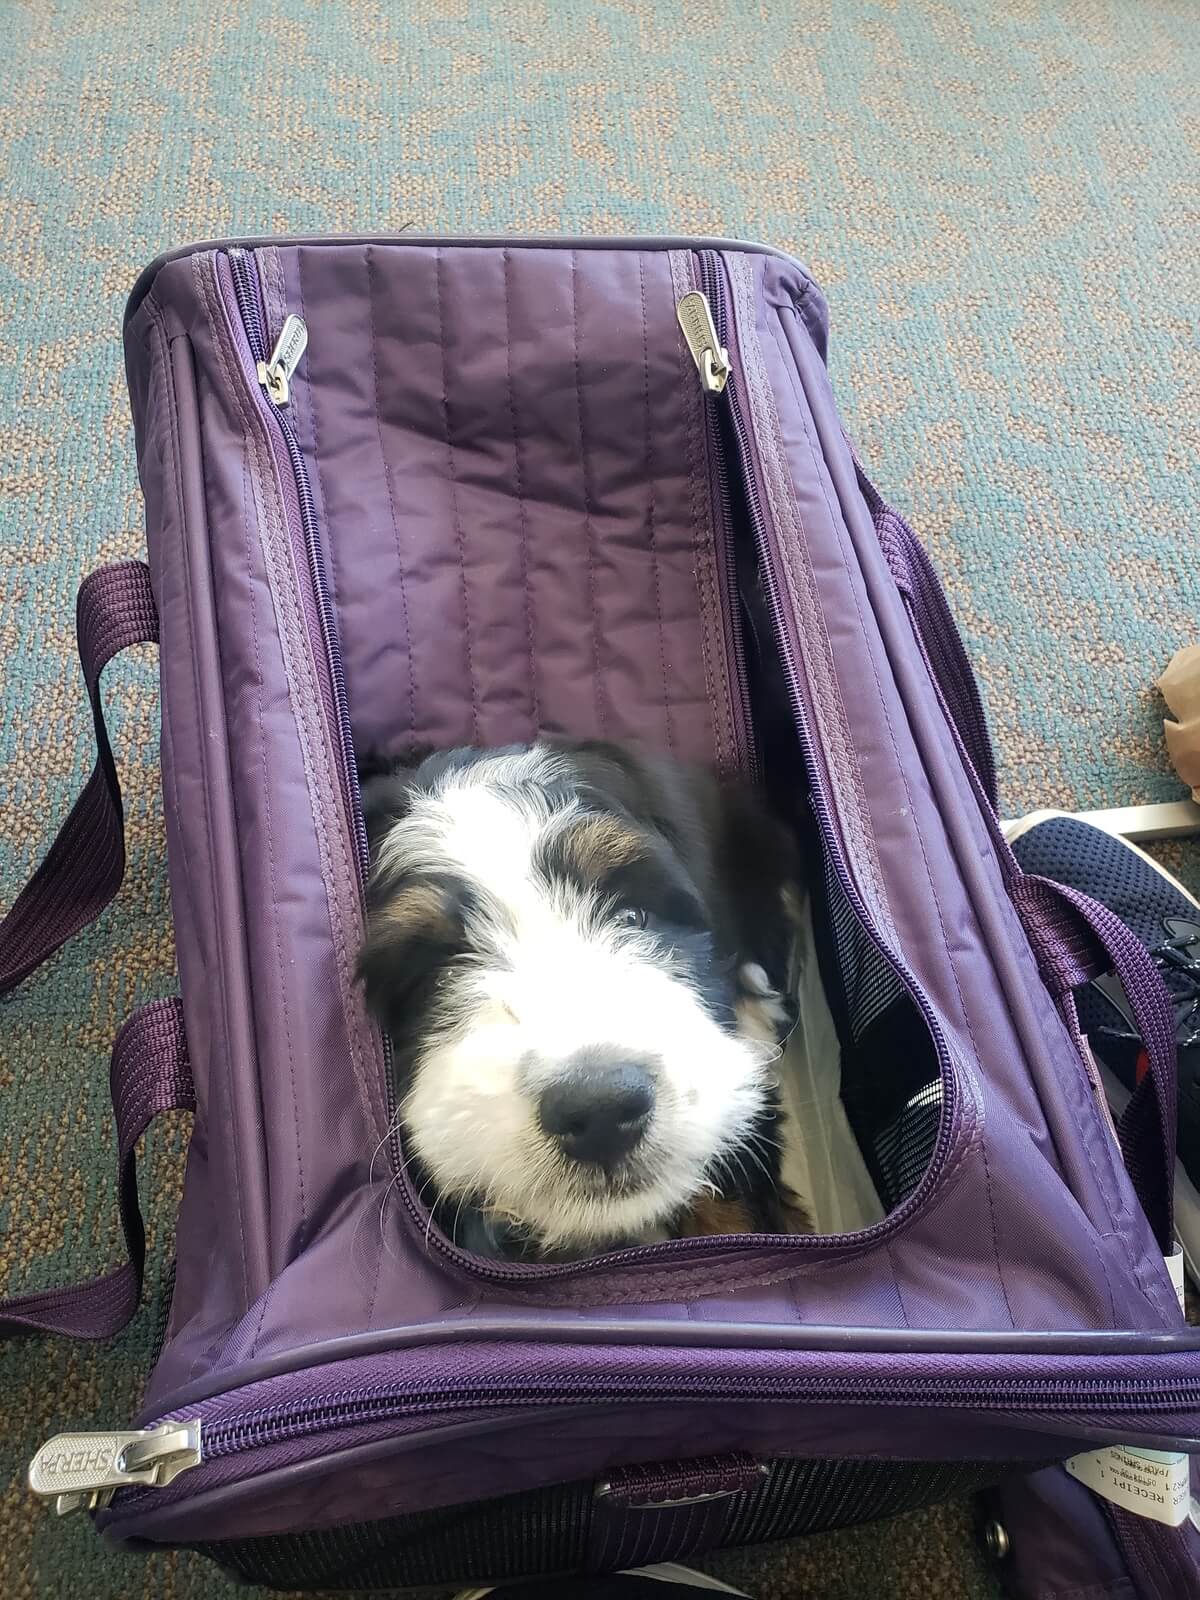 Transportation for your puppy